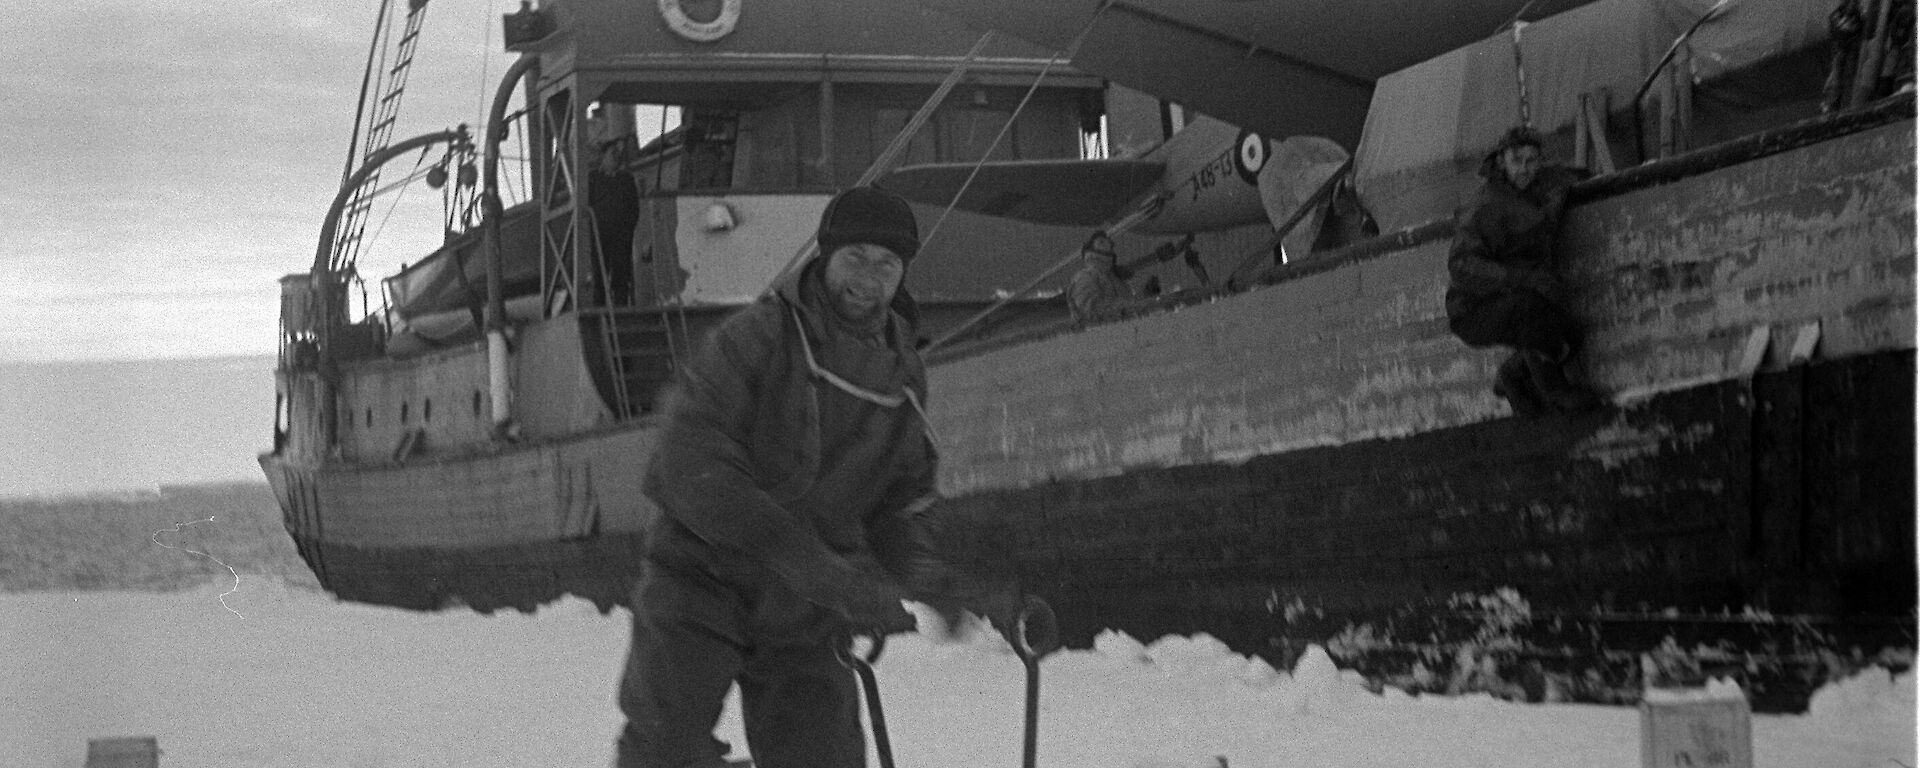 The Wyatt Earp moored beside sea ice with an expeditioner on the ice in front of the ship, collecting snow.